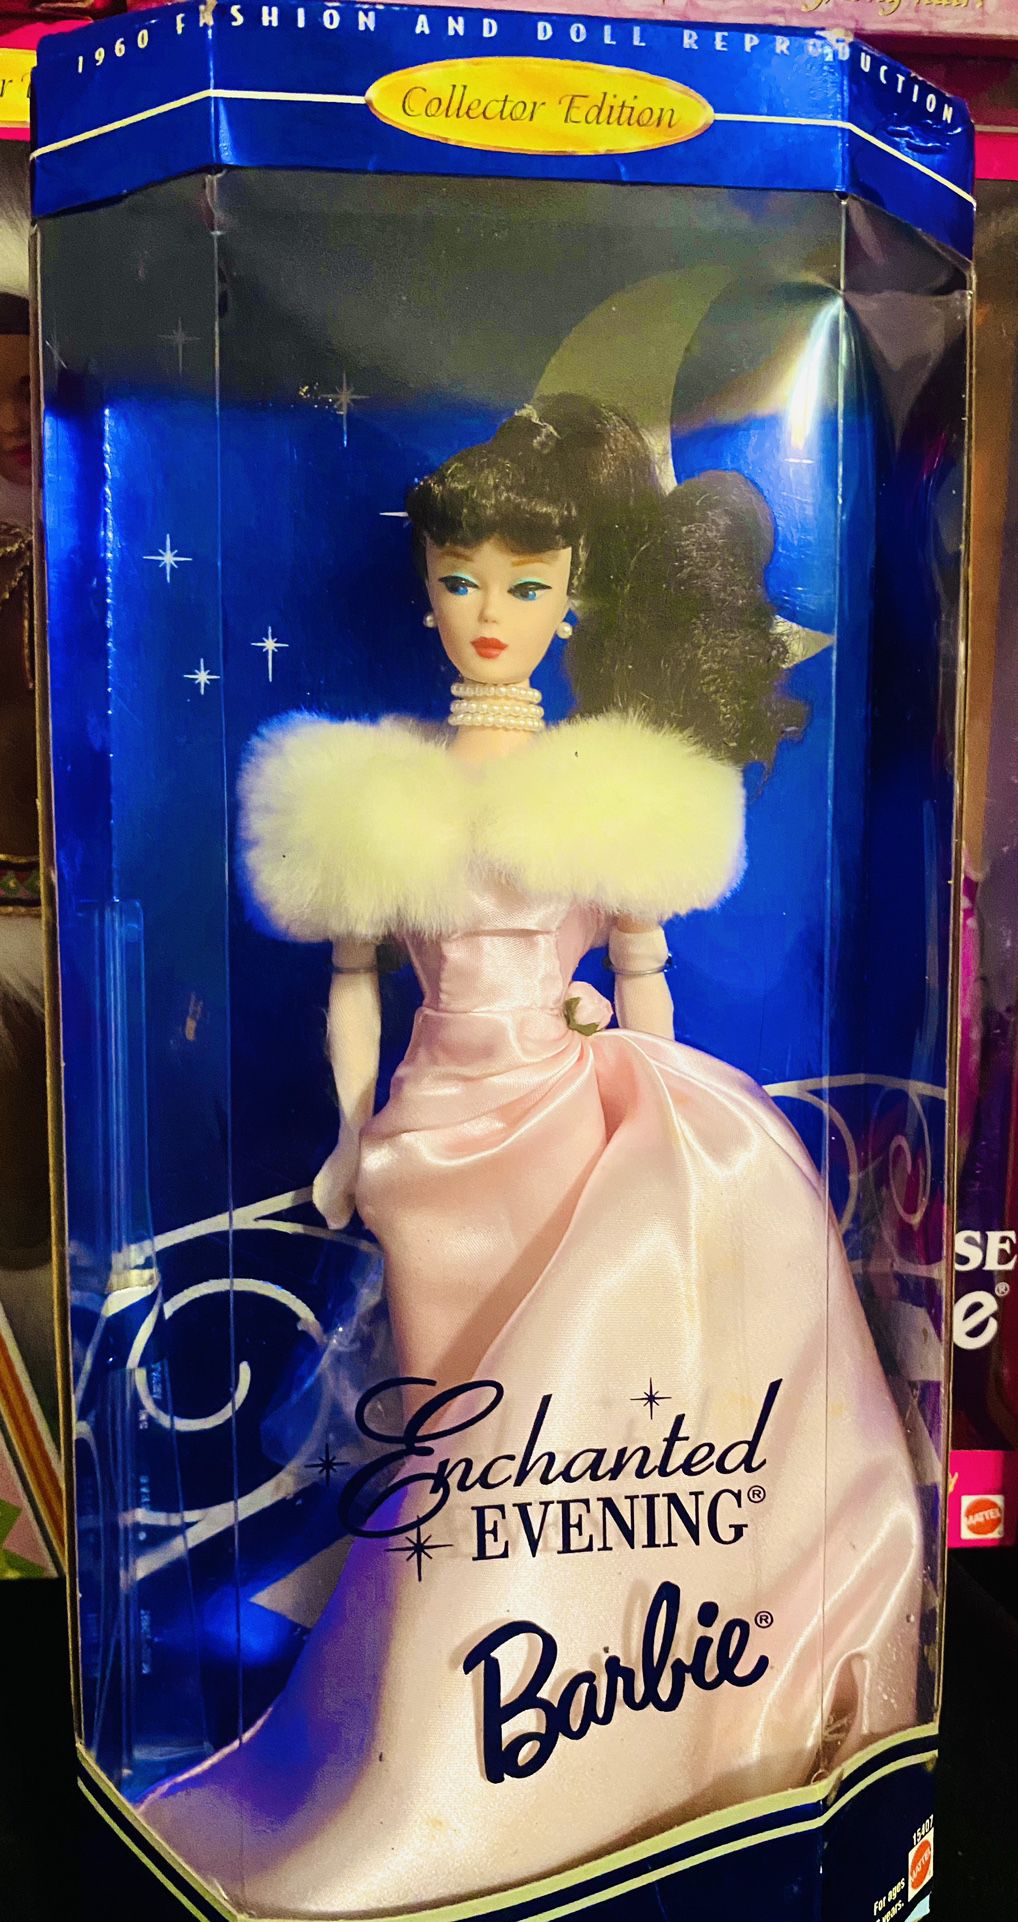 Vintage 1995 Enchanted Evening Barbie Doll. Collector Edition. Reproduction of a 1960s Fashion Doll.